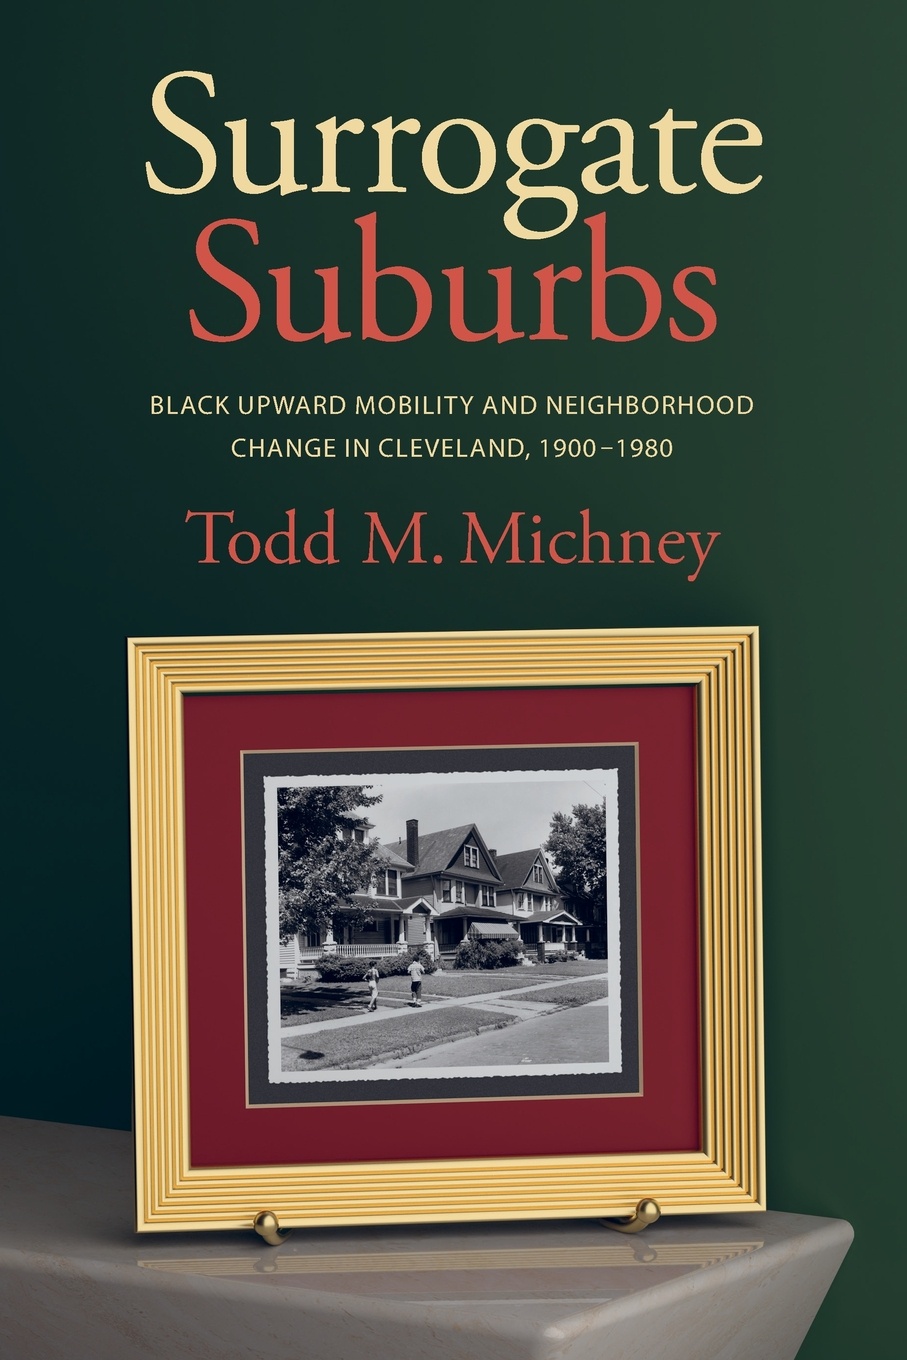 Surrogate Suburbs. Black Upward Mobility and Neighborhood Change in Cleveland, 1900-1980